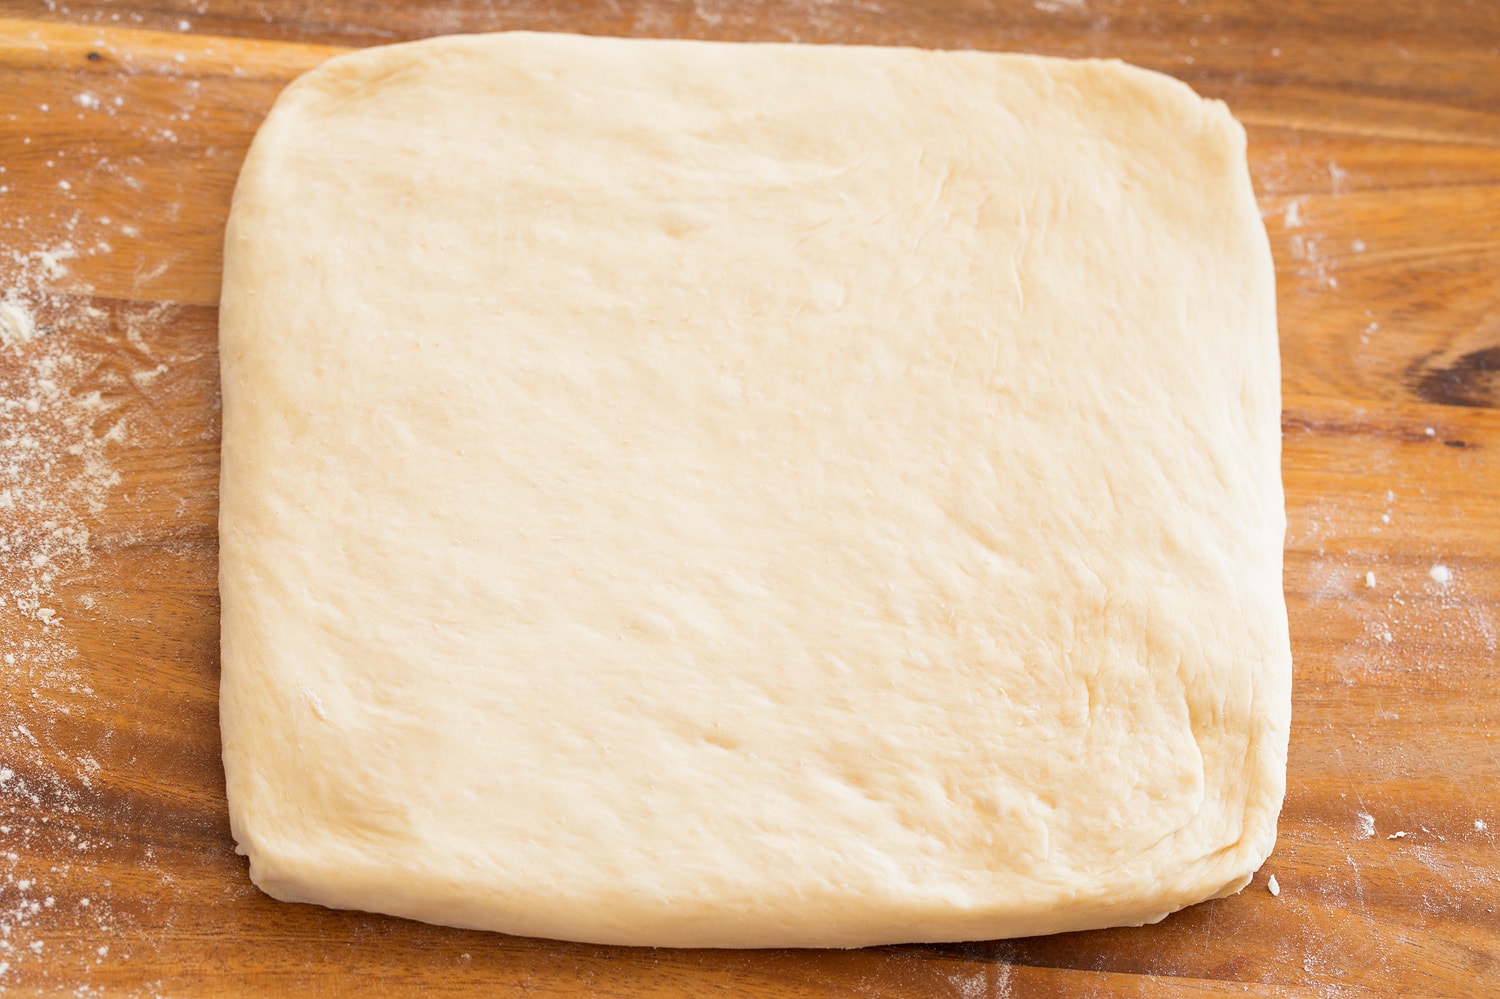 Rolled out quare dough.